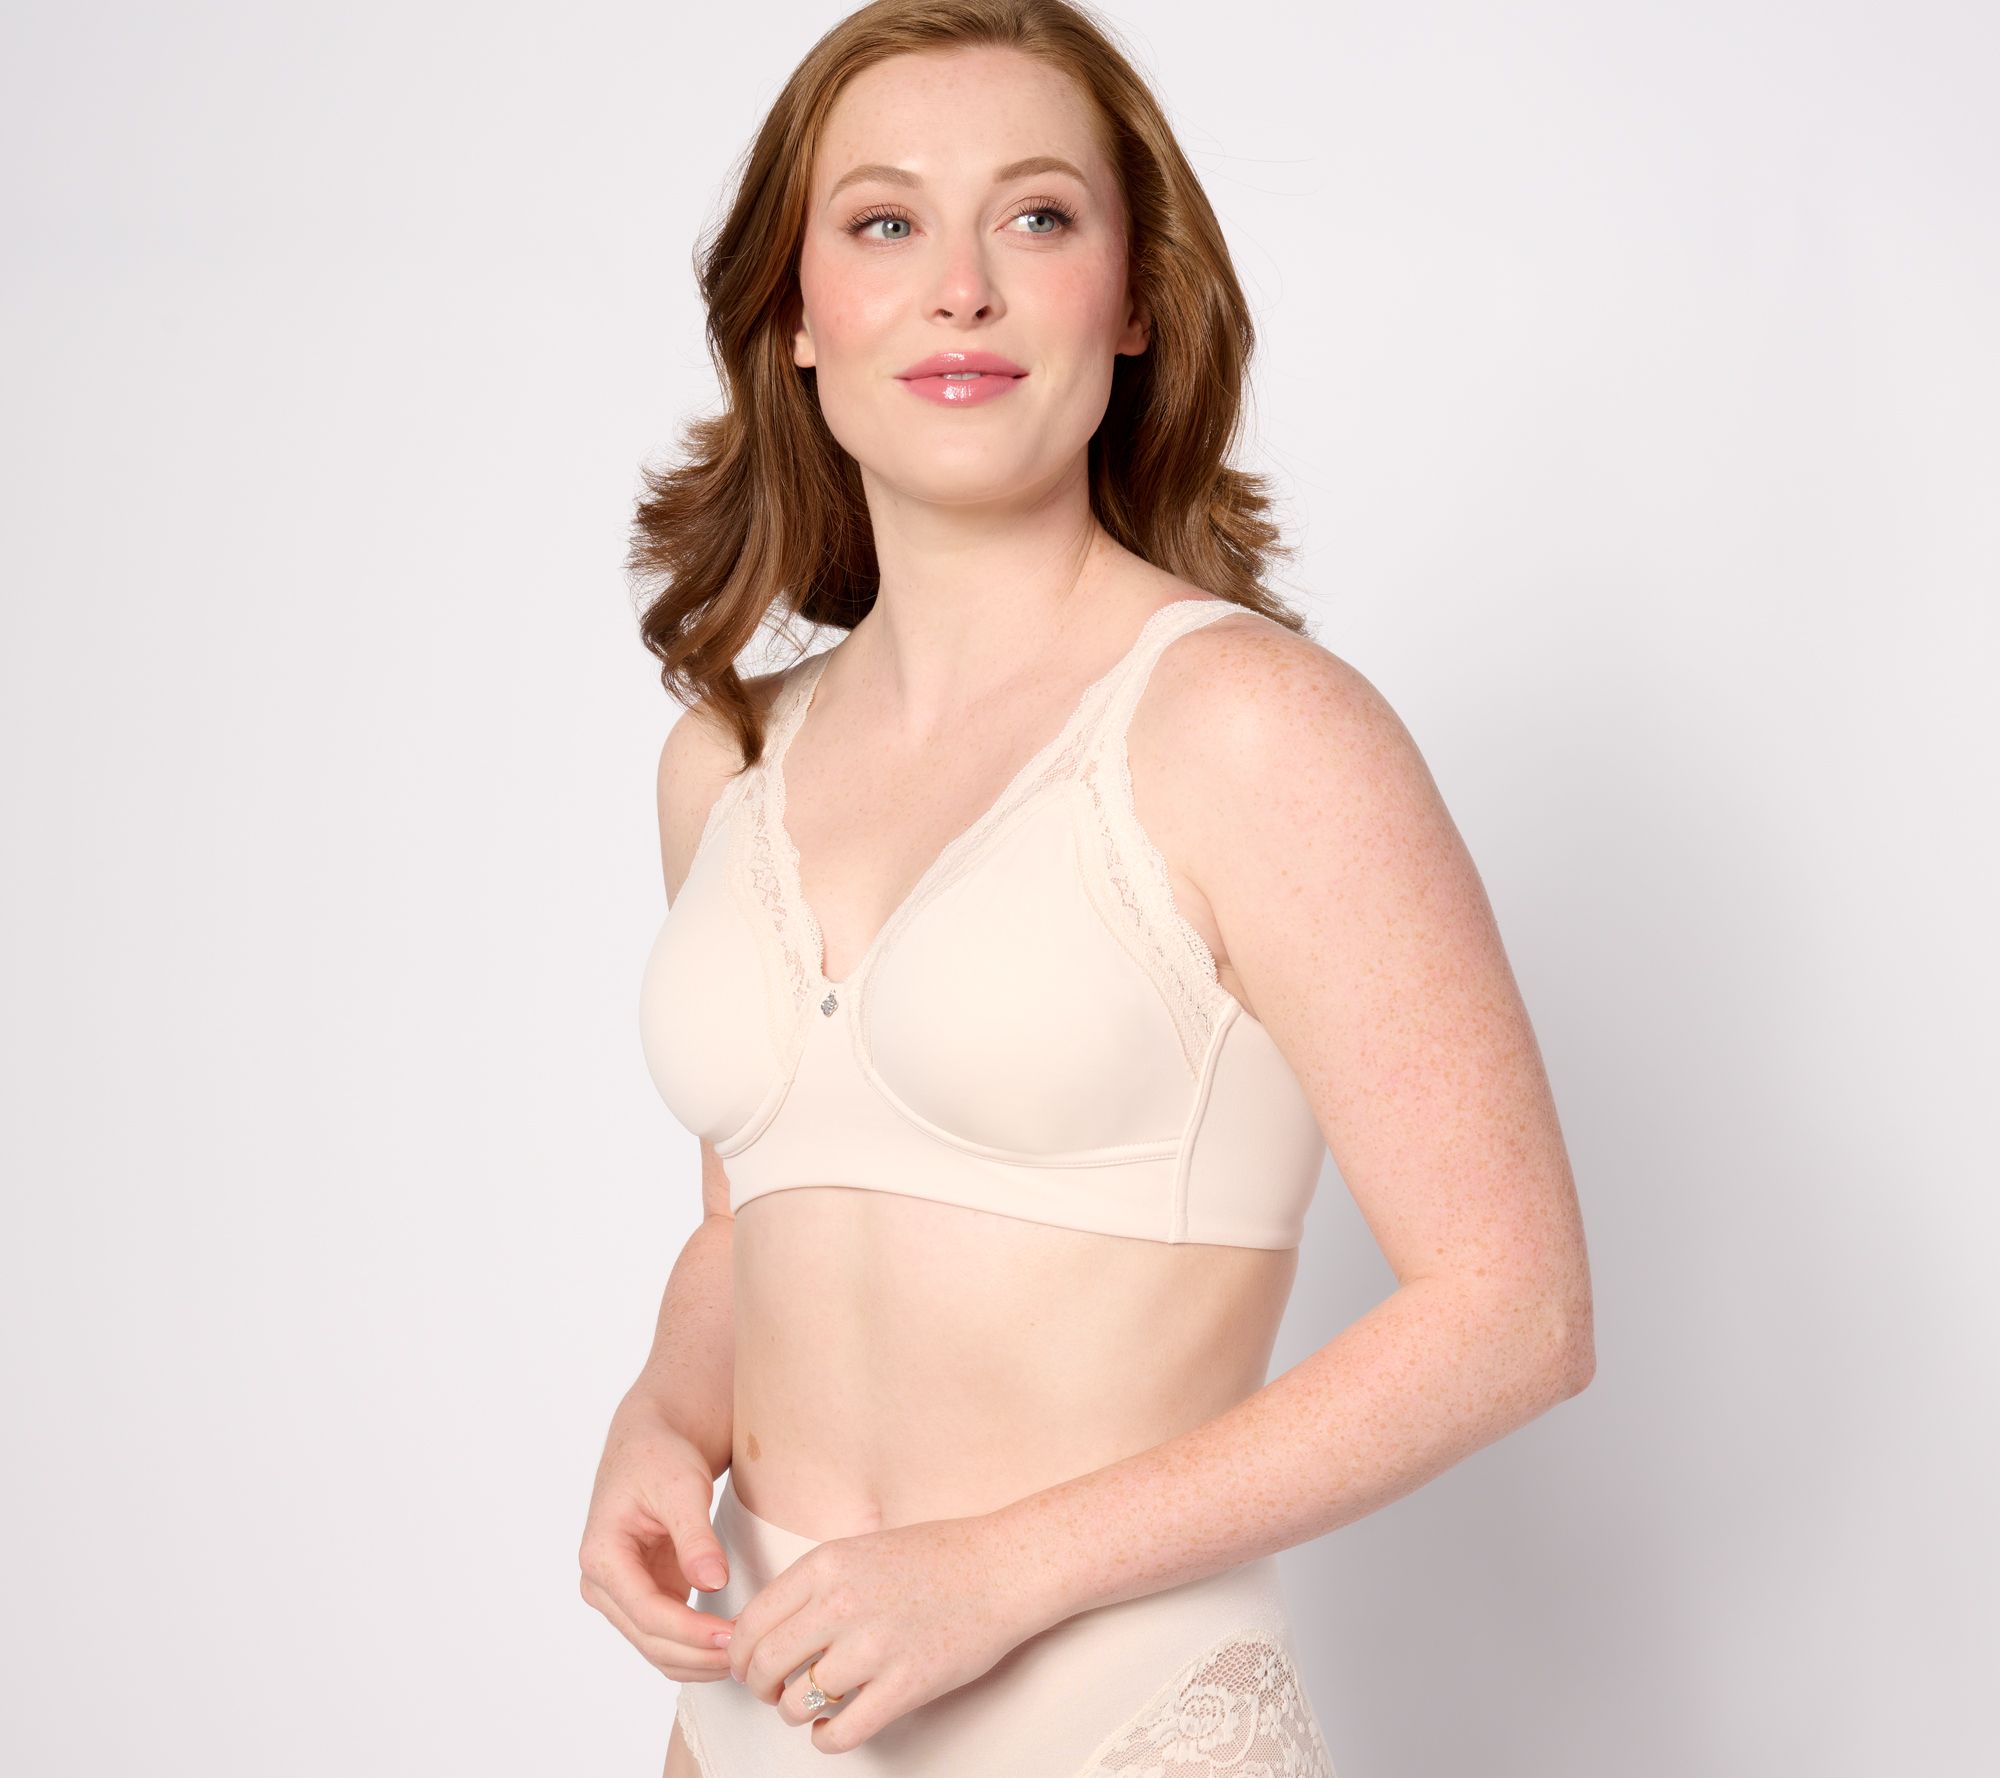 As Is Breezies Jacquard Back Smoothing Underwire Bra 